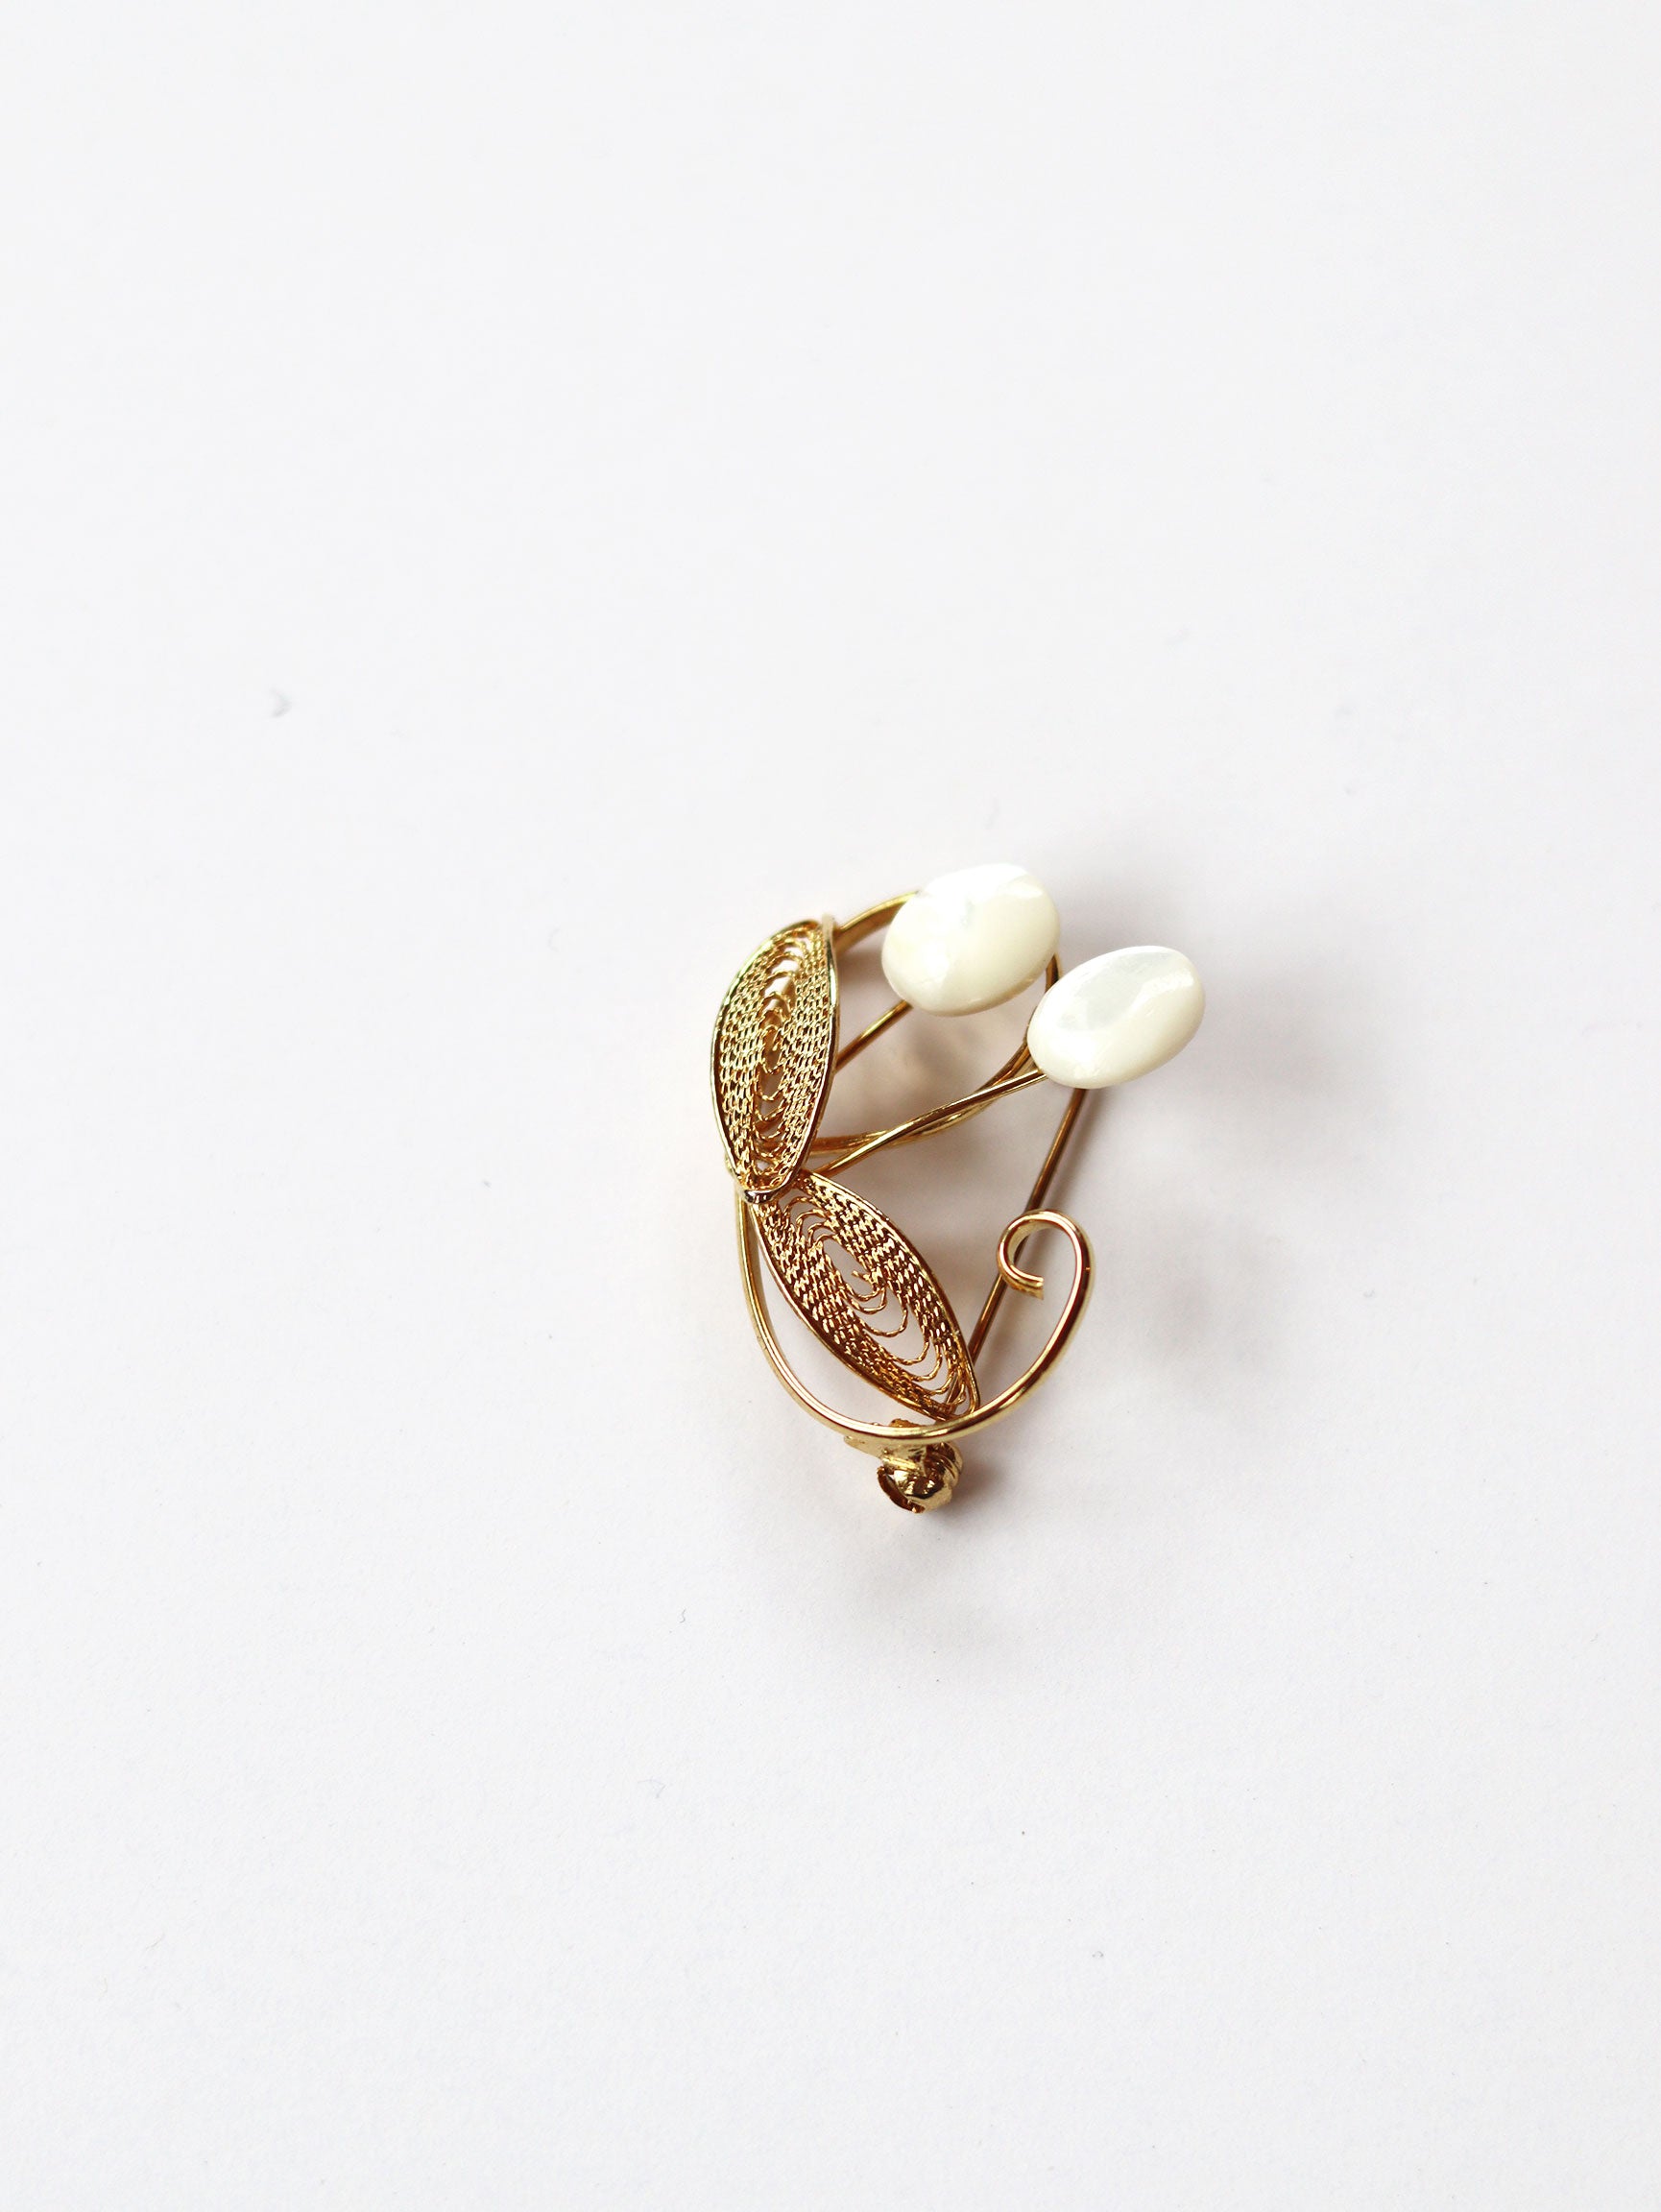 Vintage Mother of Pearl Cattail Brooch